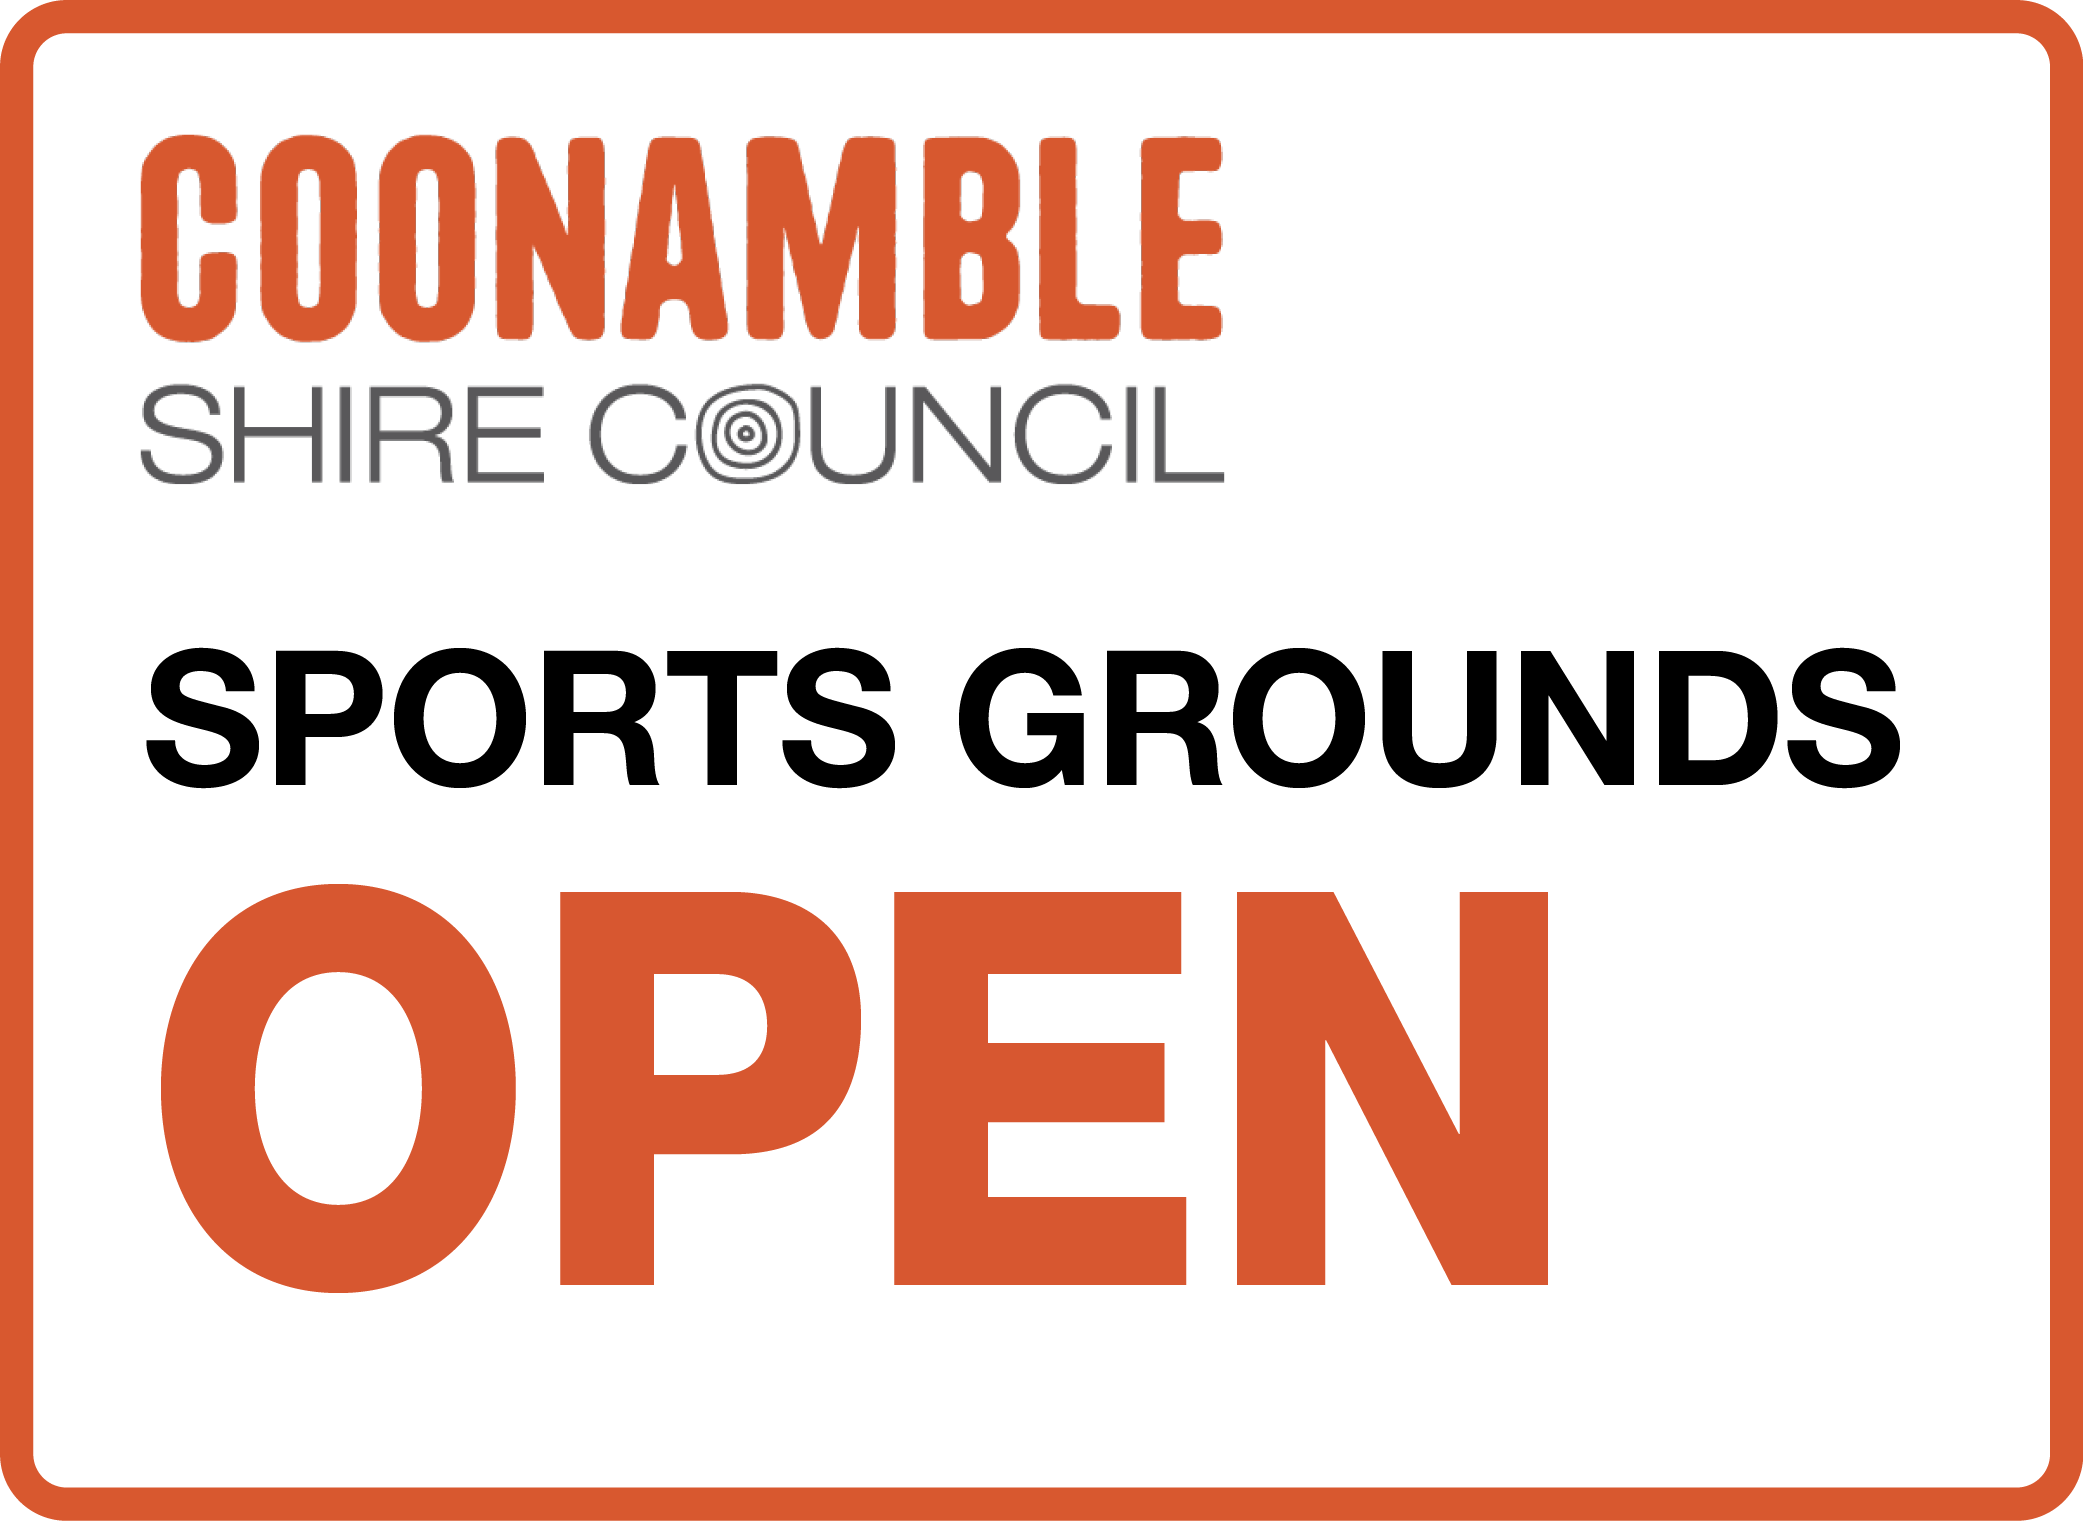 All sportsgrounds open and available for use